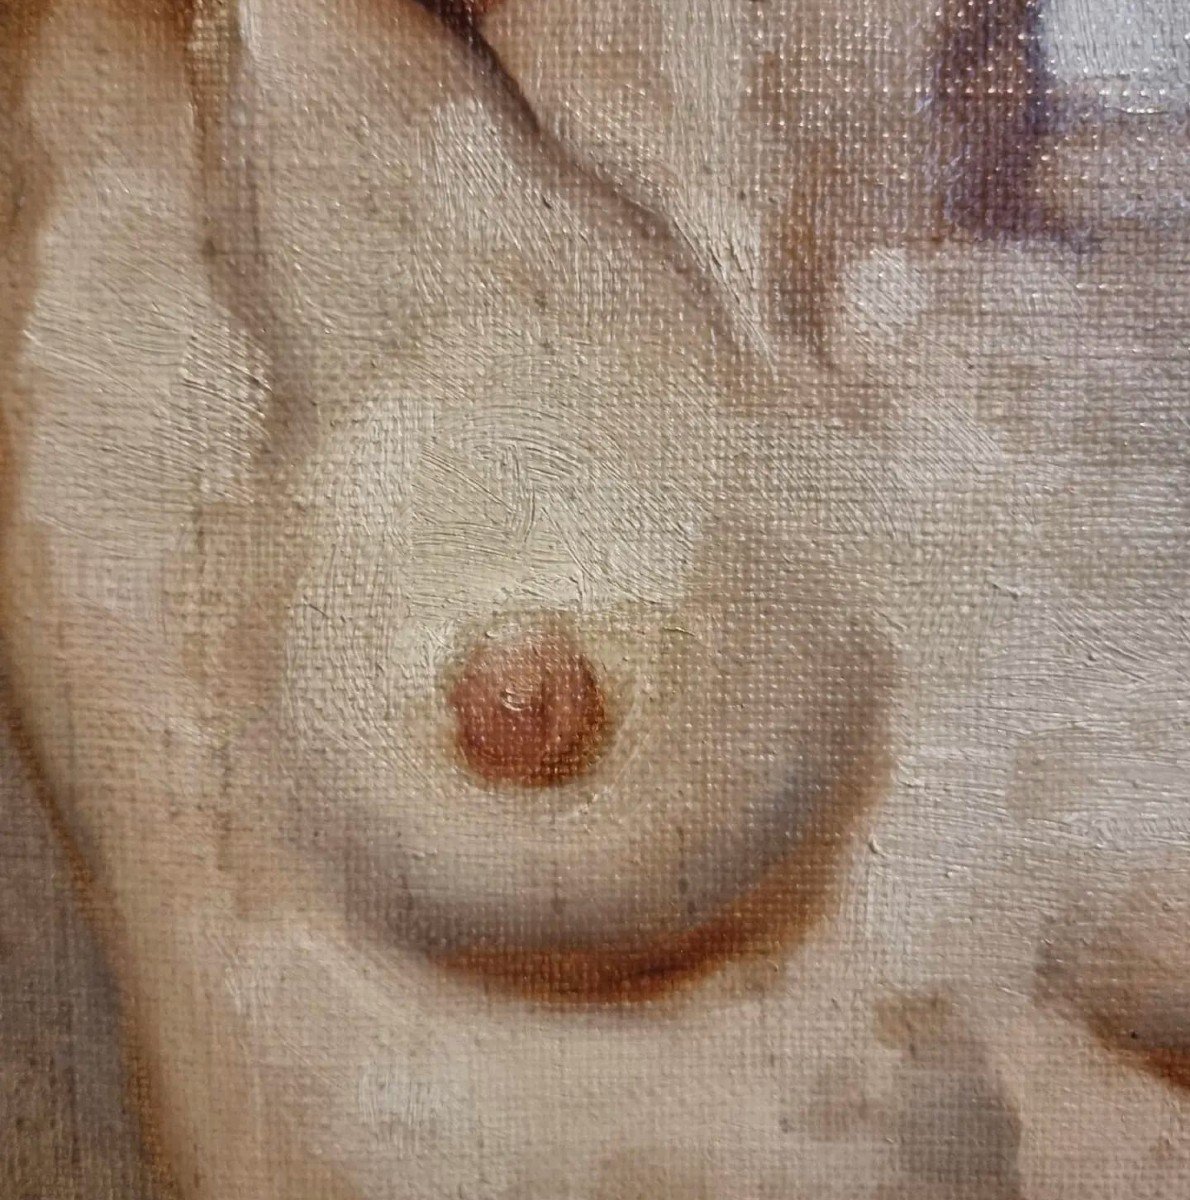 "sensual Woman”: An Oil On Canvas From The Late 19th Century-photo-3